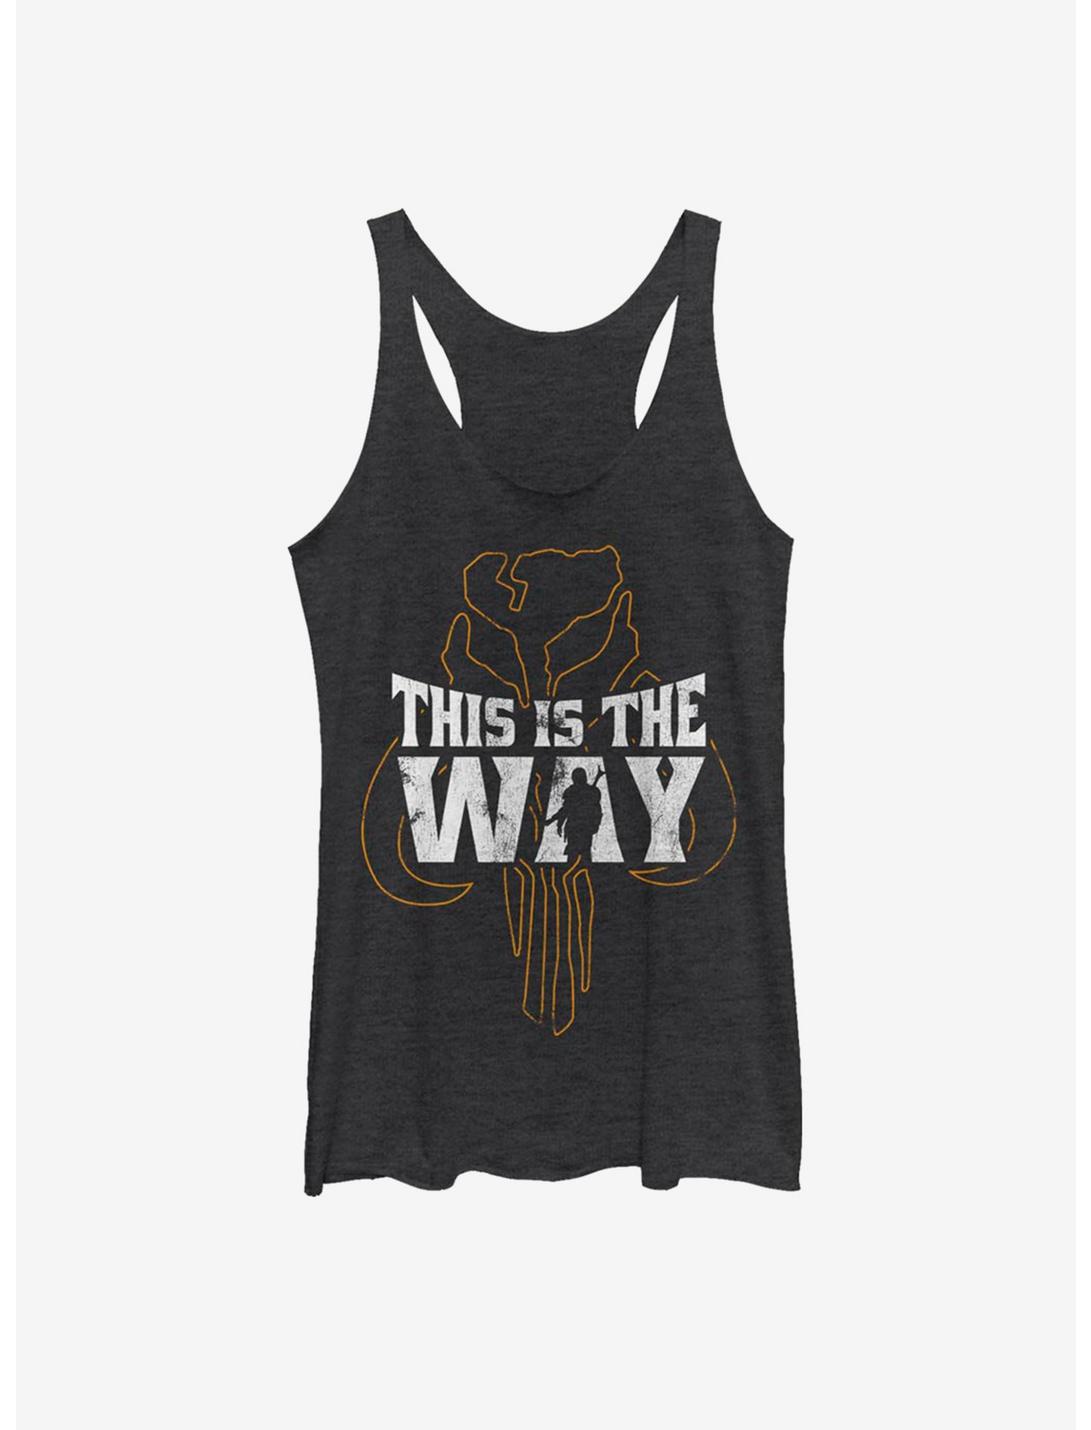 Plus Size Star Wars The Mandalorian This Is The Way Silhouette Womens Tank Top, BLK HTR, hi-res